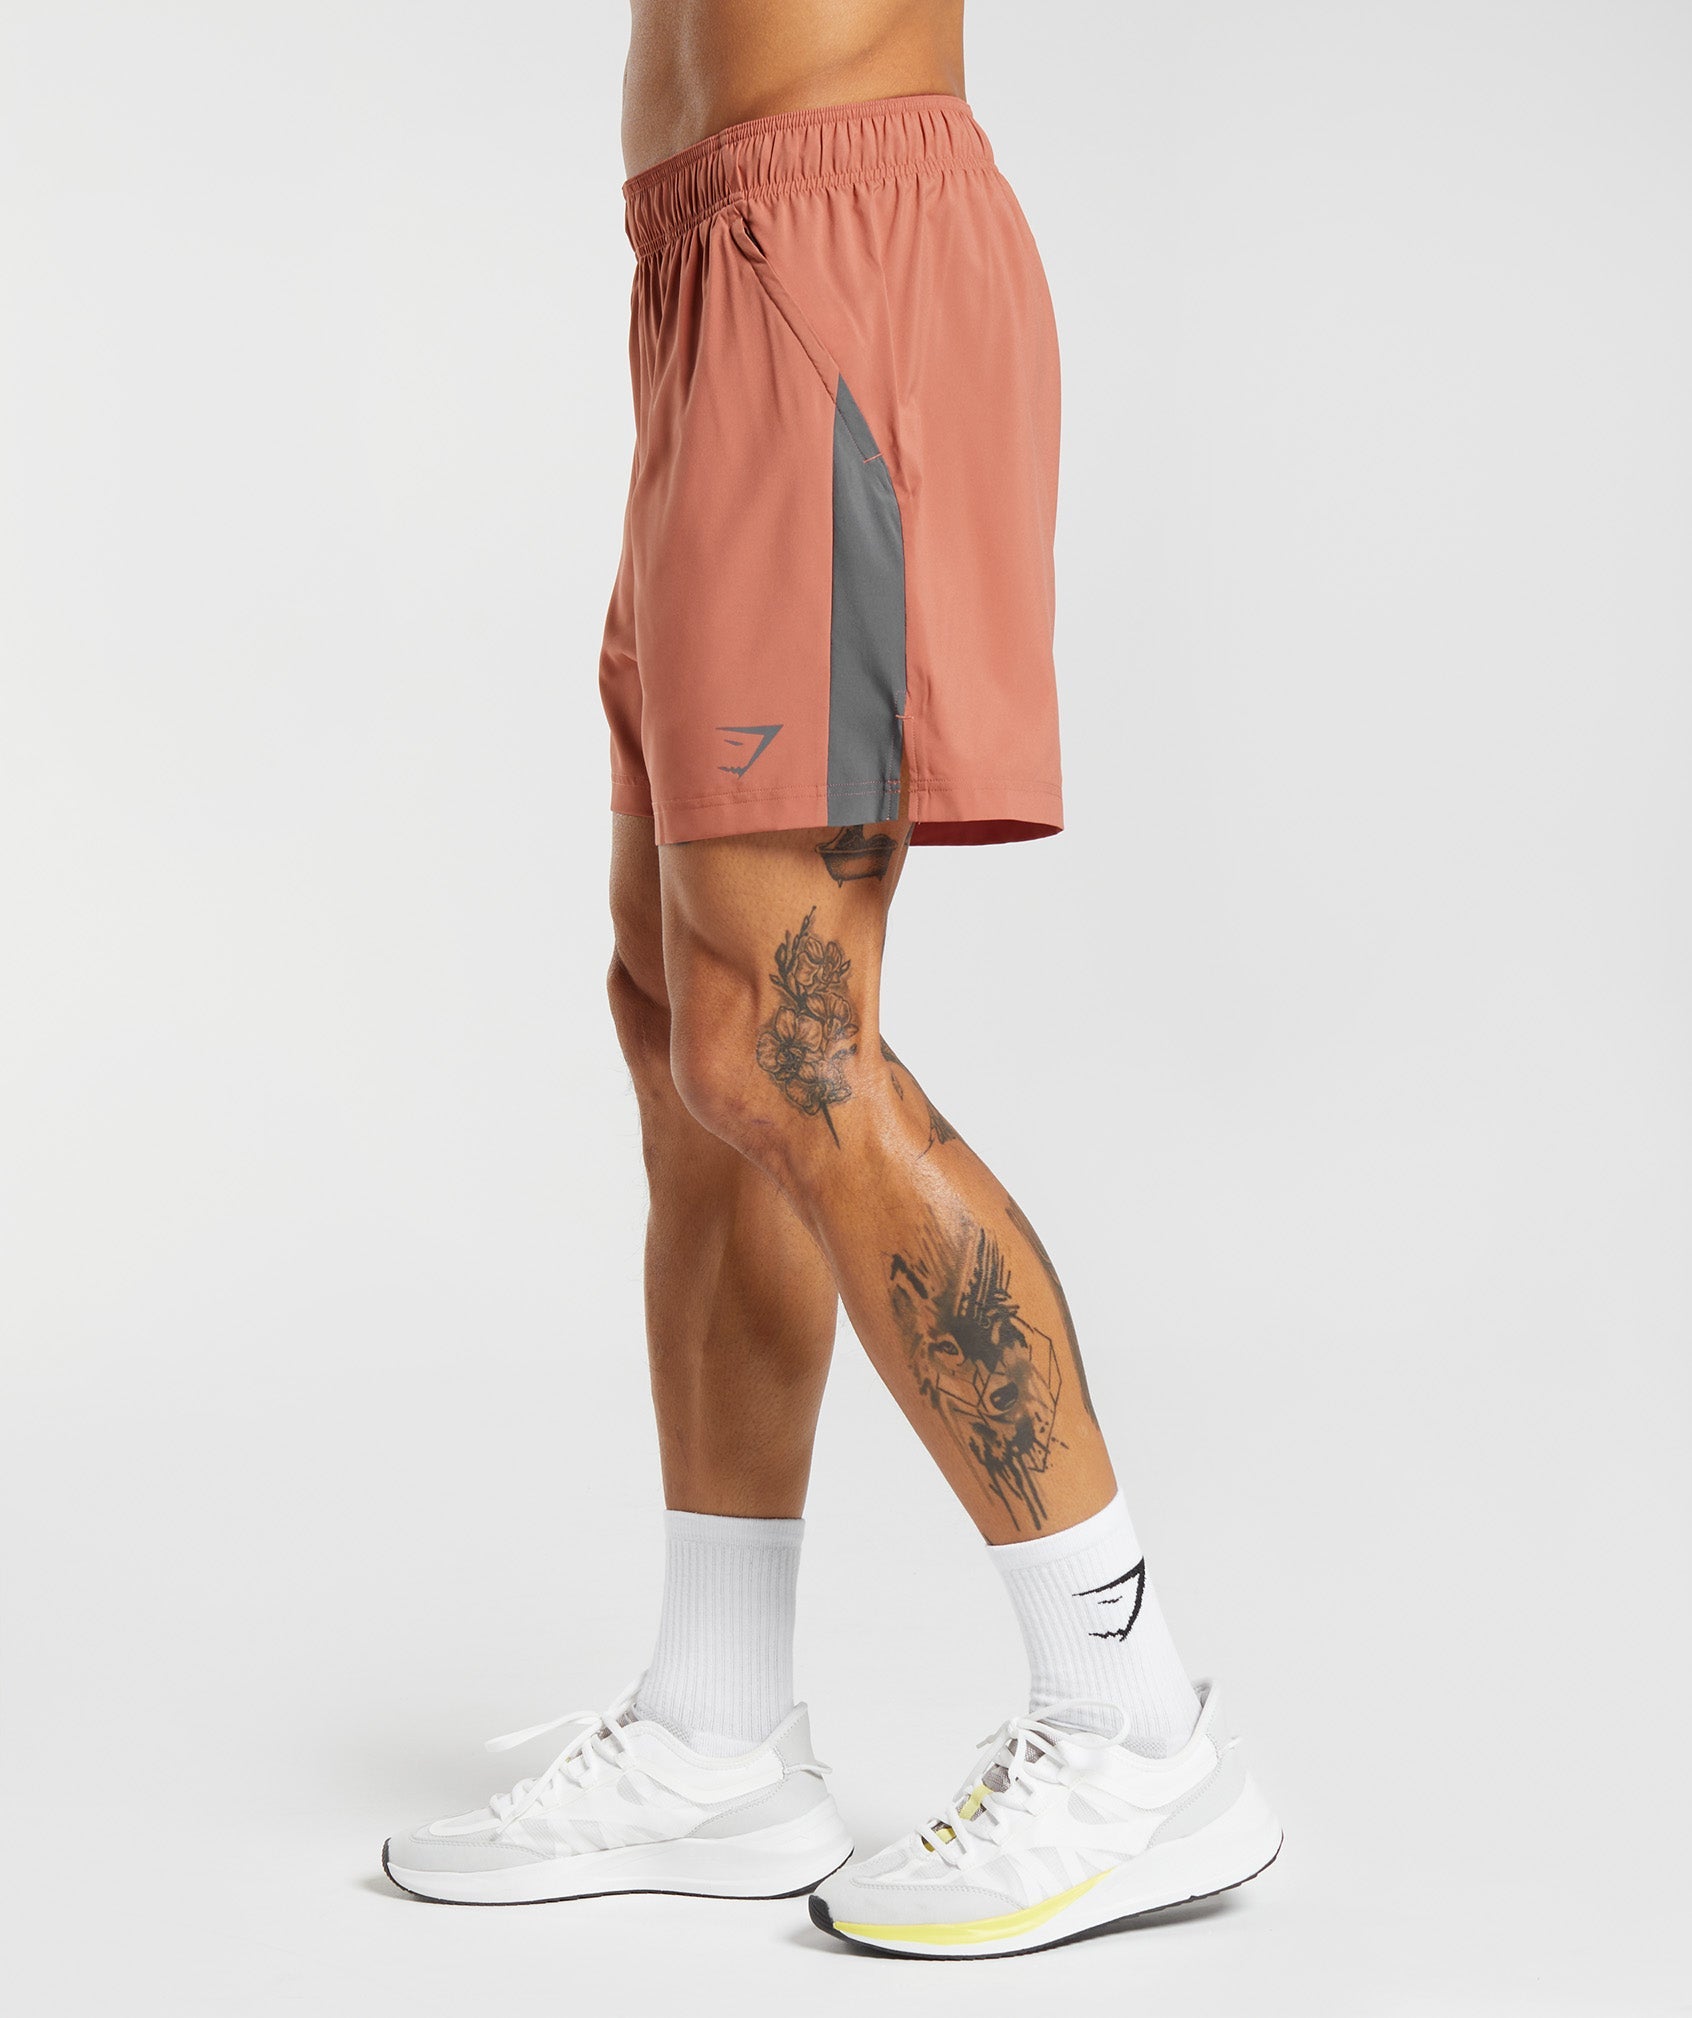 Sport Shorts in Persimmon Red/Silhouette Grey